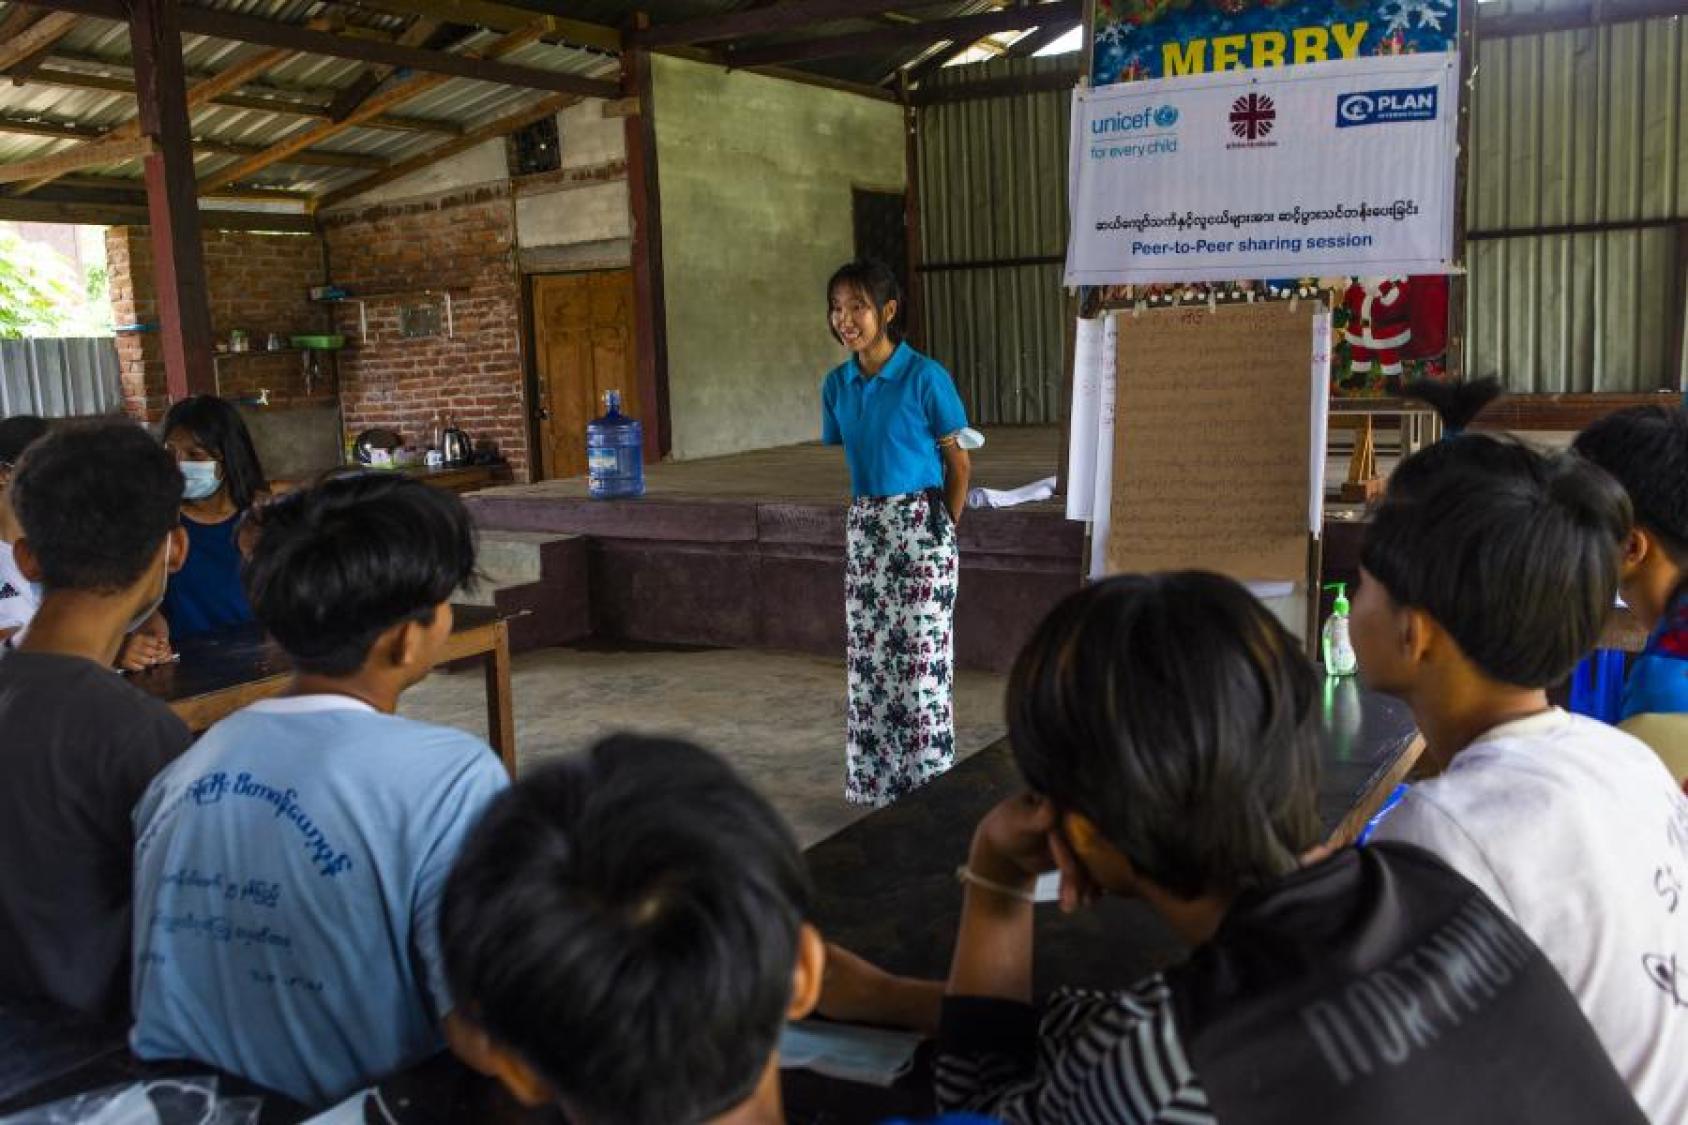 A young woman standing in front of some teenagers, speaking to them in a peer-to-peer knowledge sharing session.